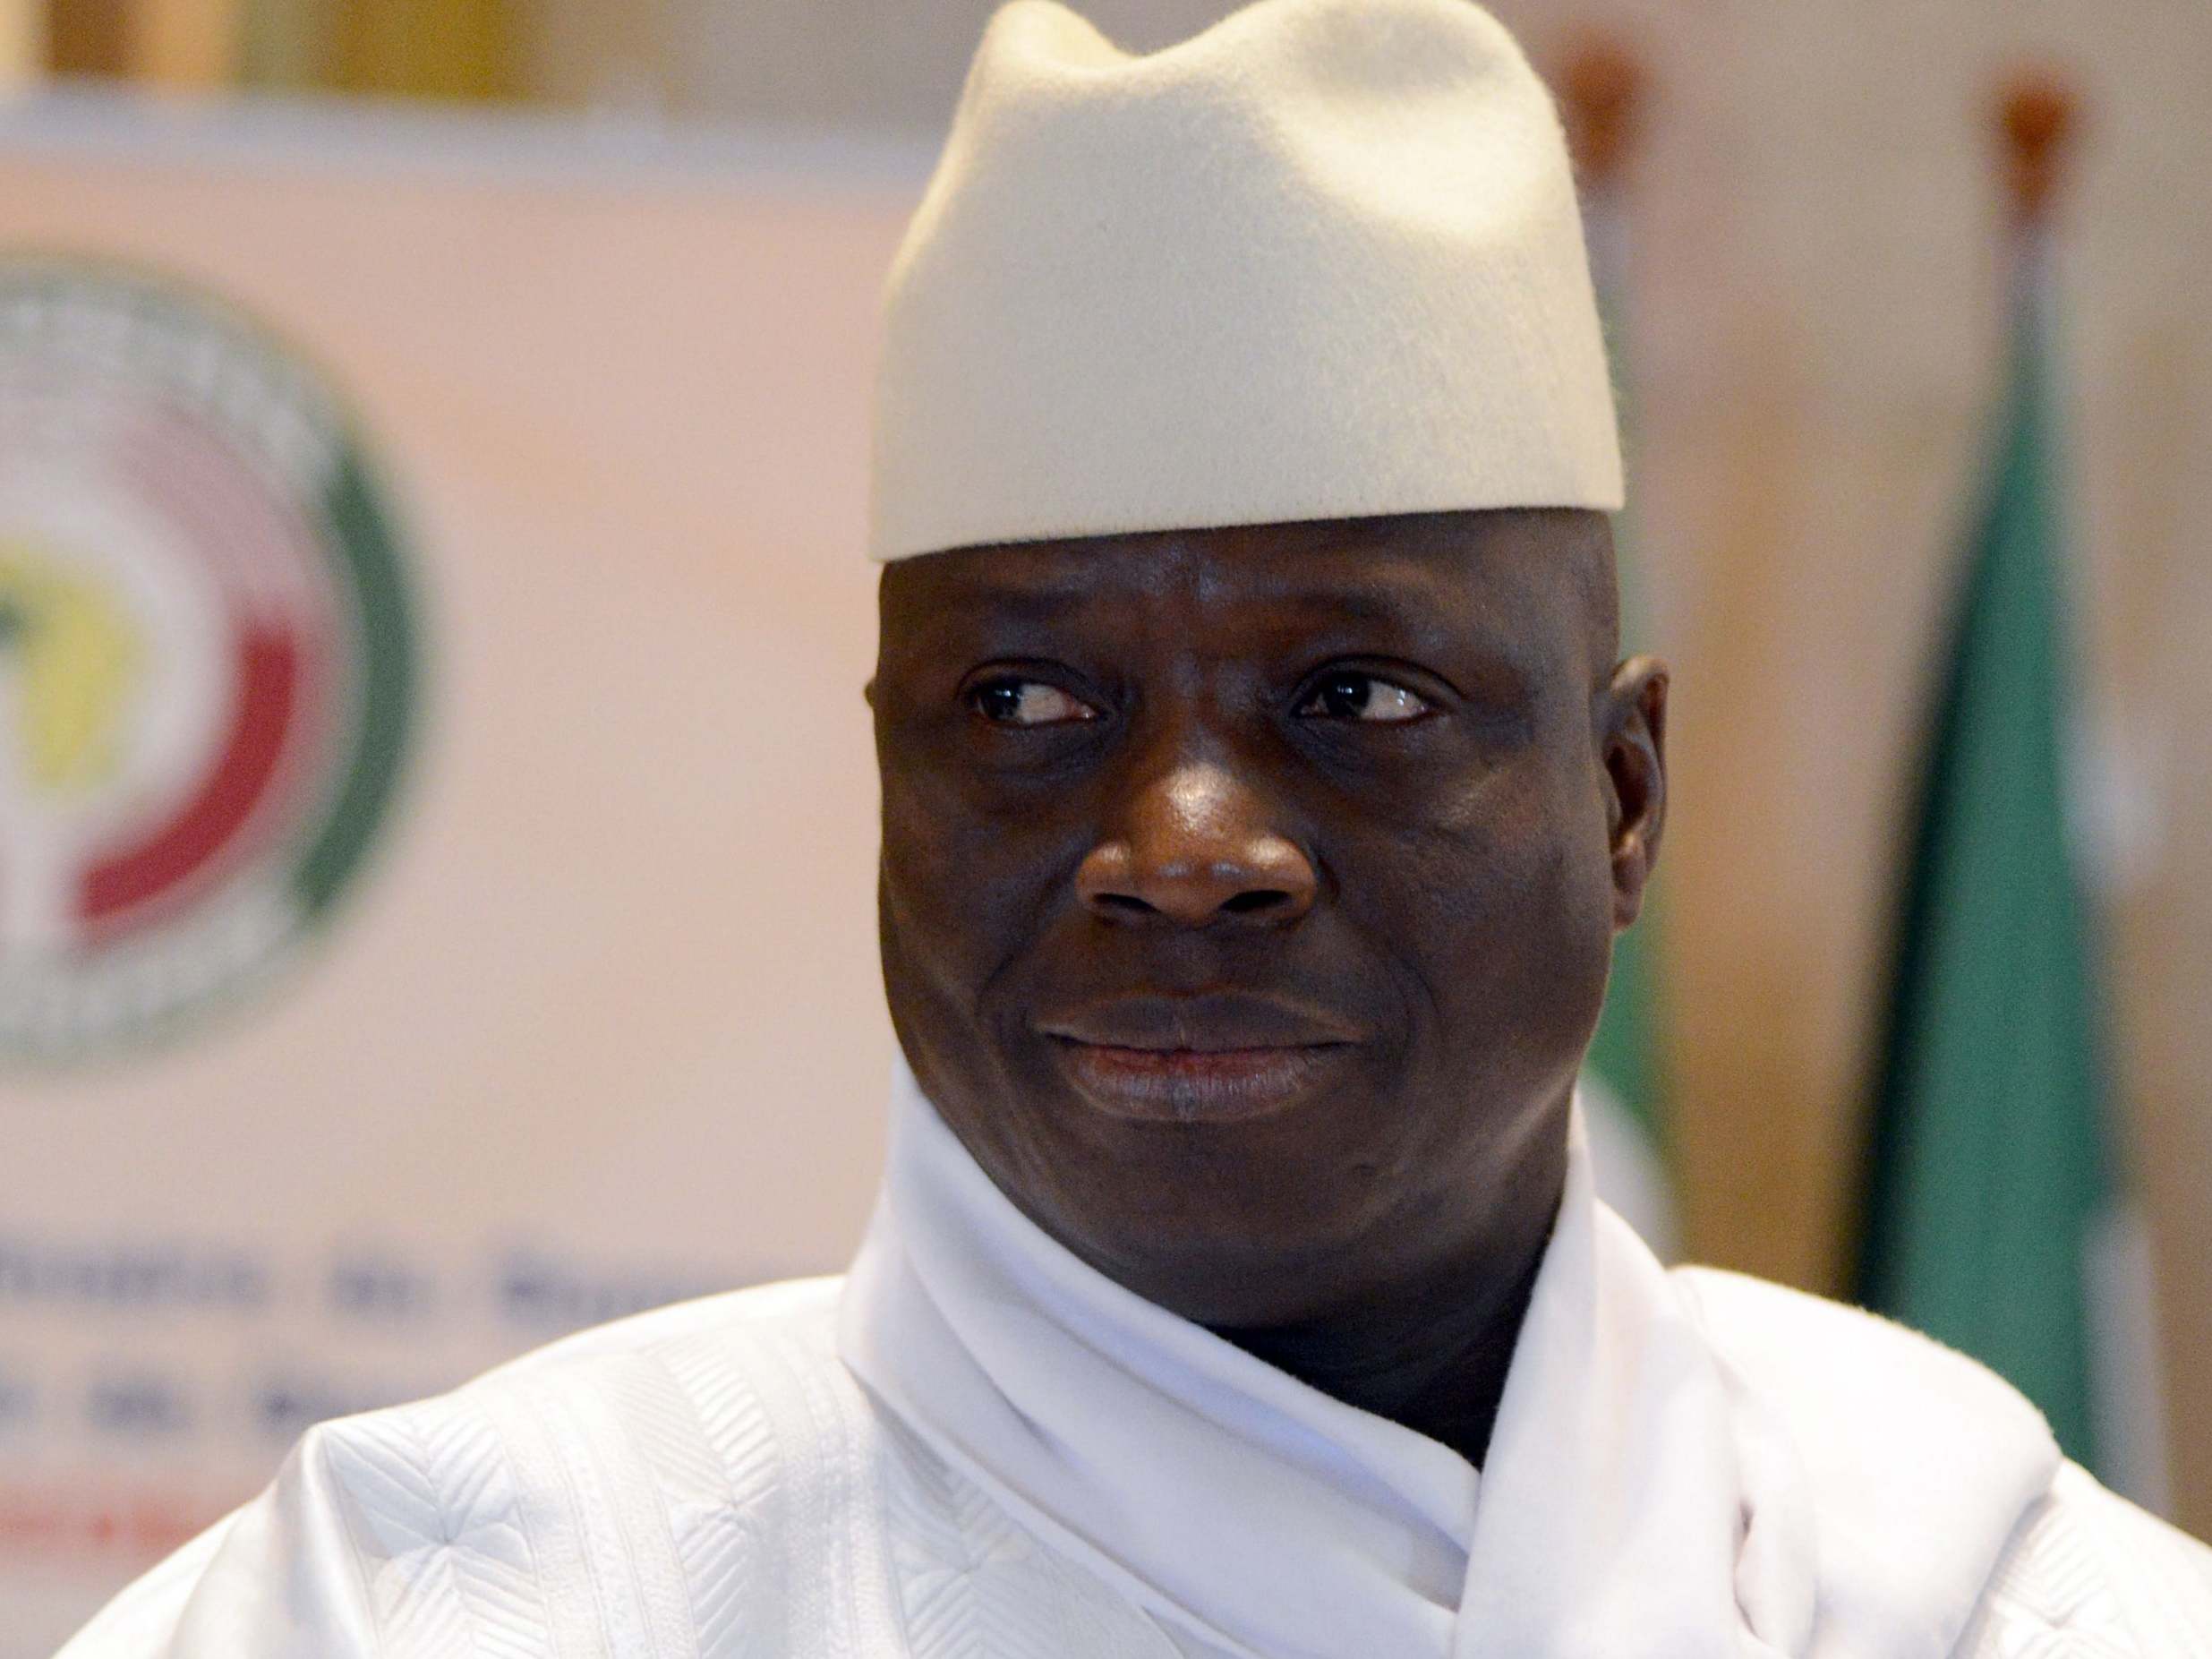 Former Gambia president Yahya Jammeh, who entered exile in 2017